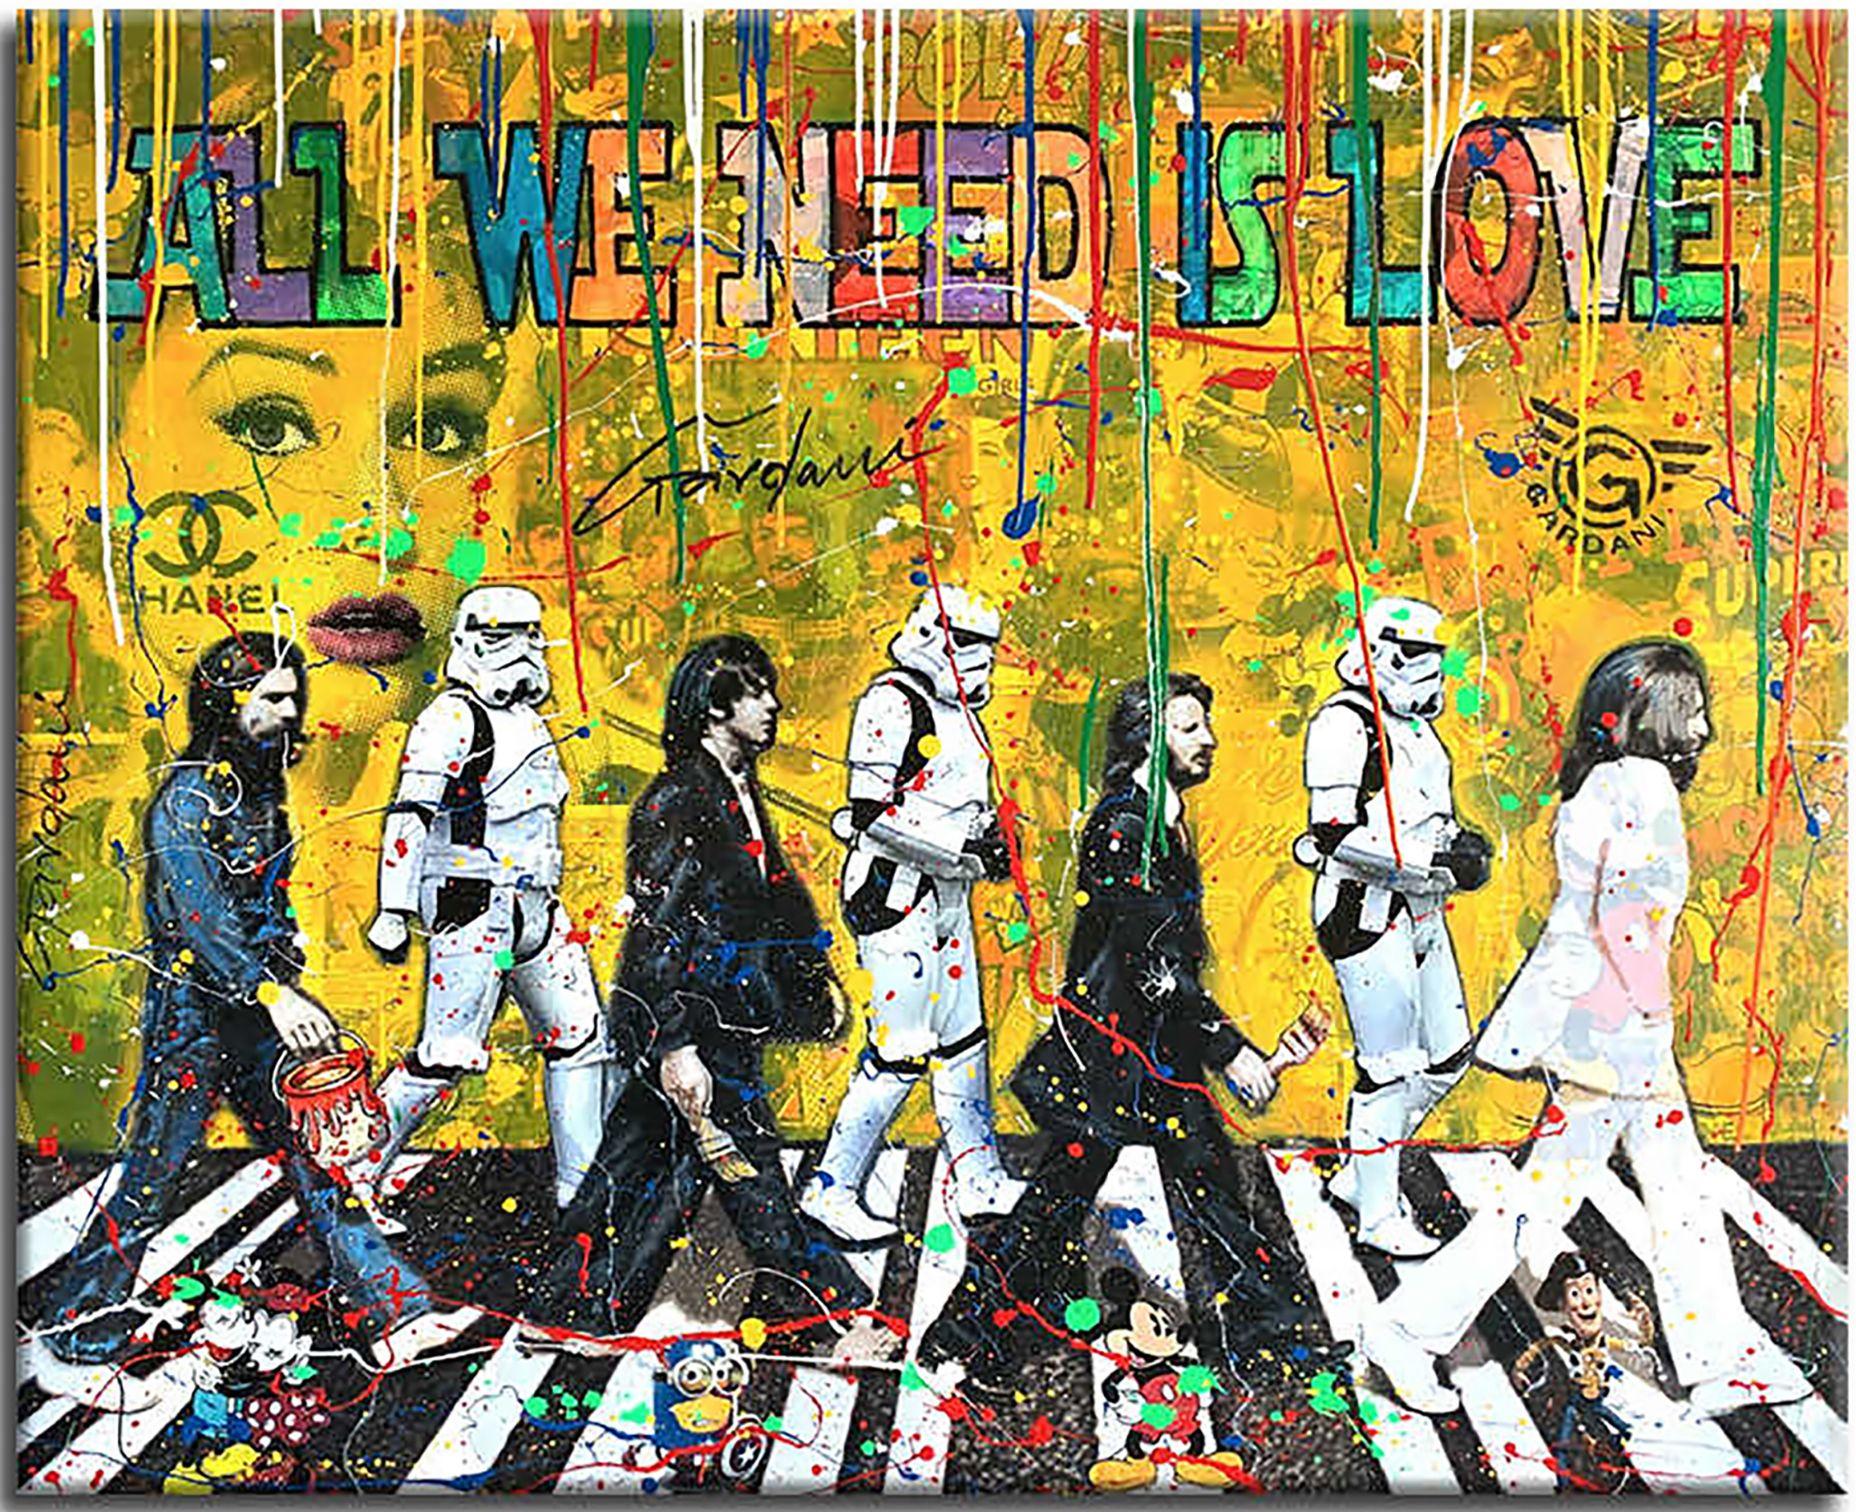 Medium: Mix media, silk screening, hand finished with Oil, Acrylic, stencils,  spray paint, Collage with old iconography images, newspapers, comic books, magazines and text on canvas.    Size: 39 x 49 in.    Artwork: Stretched ready to hang, not